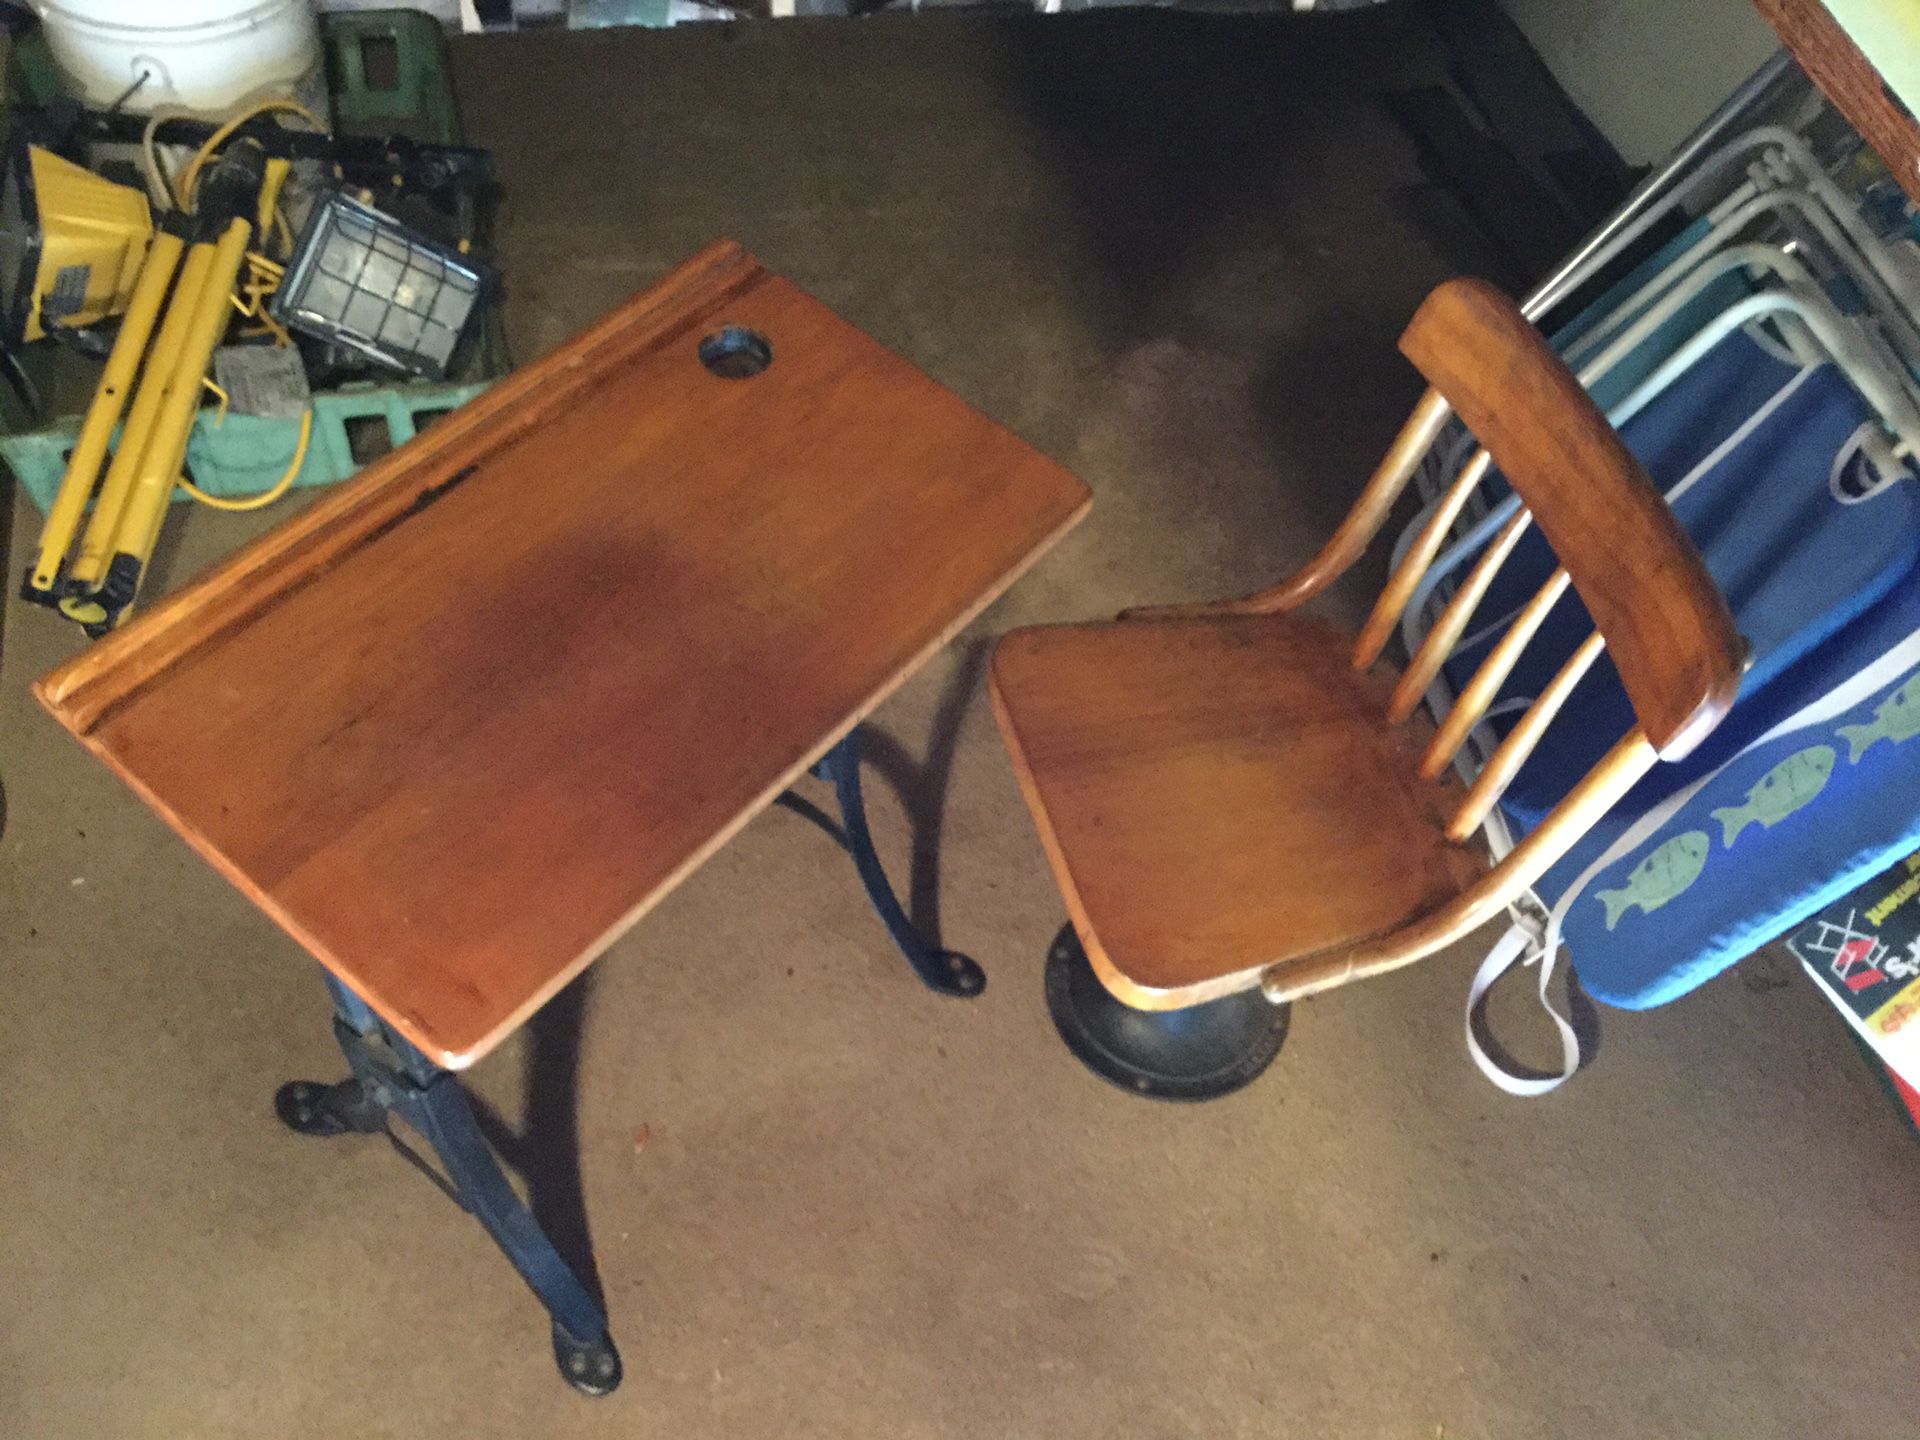 Antique School Desk and Chair